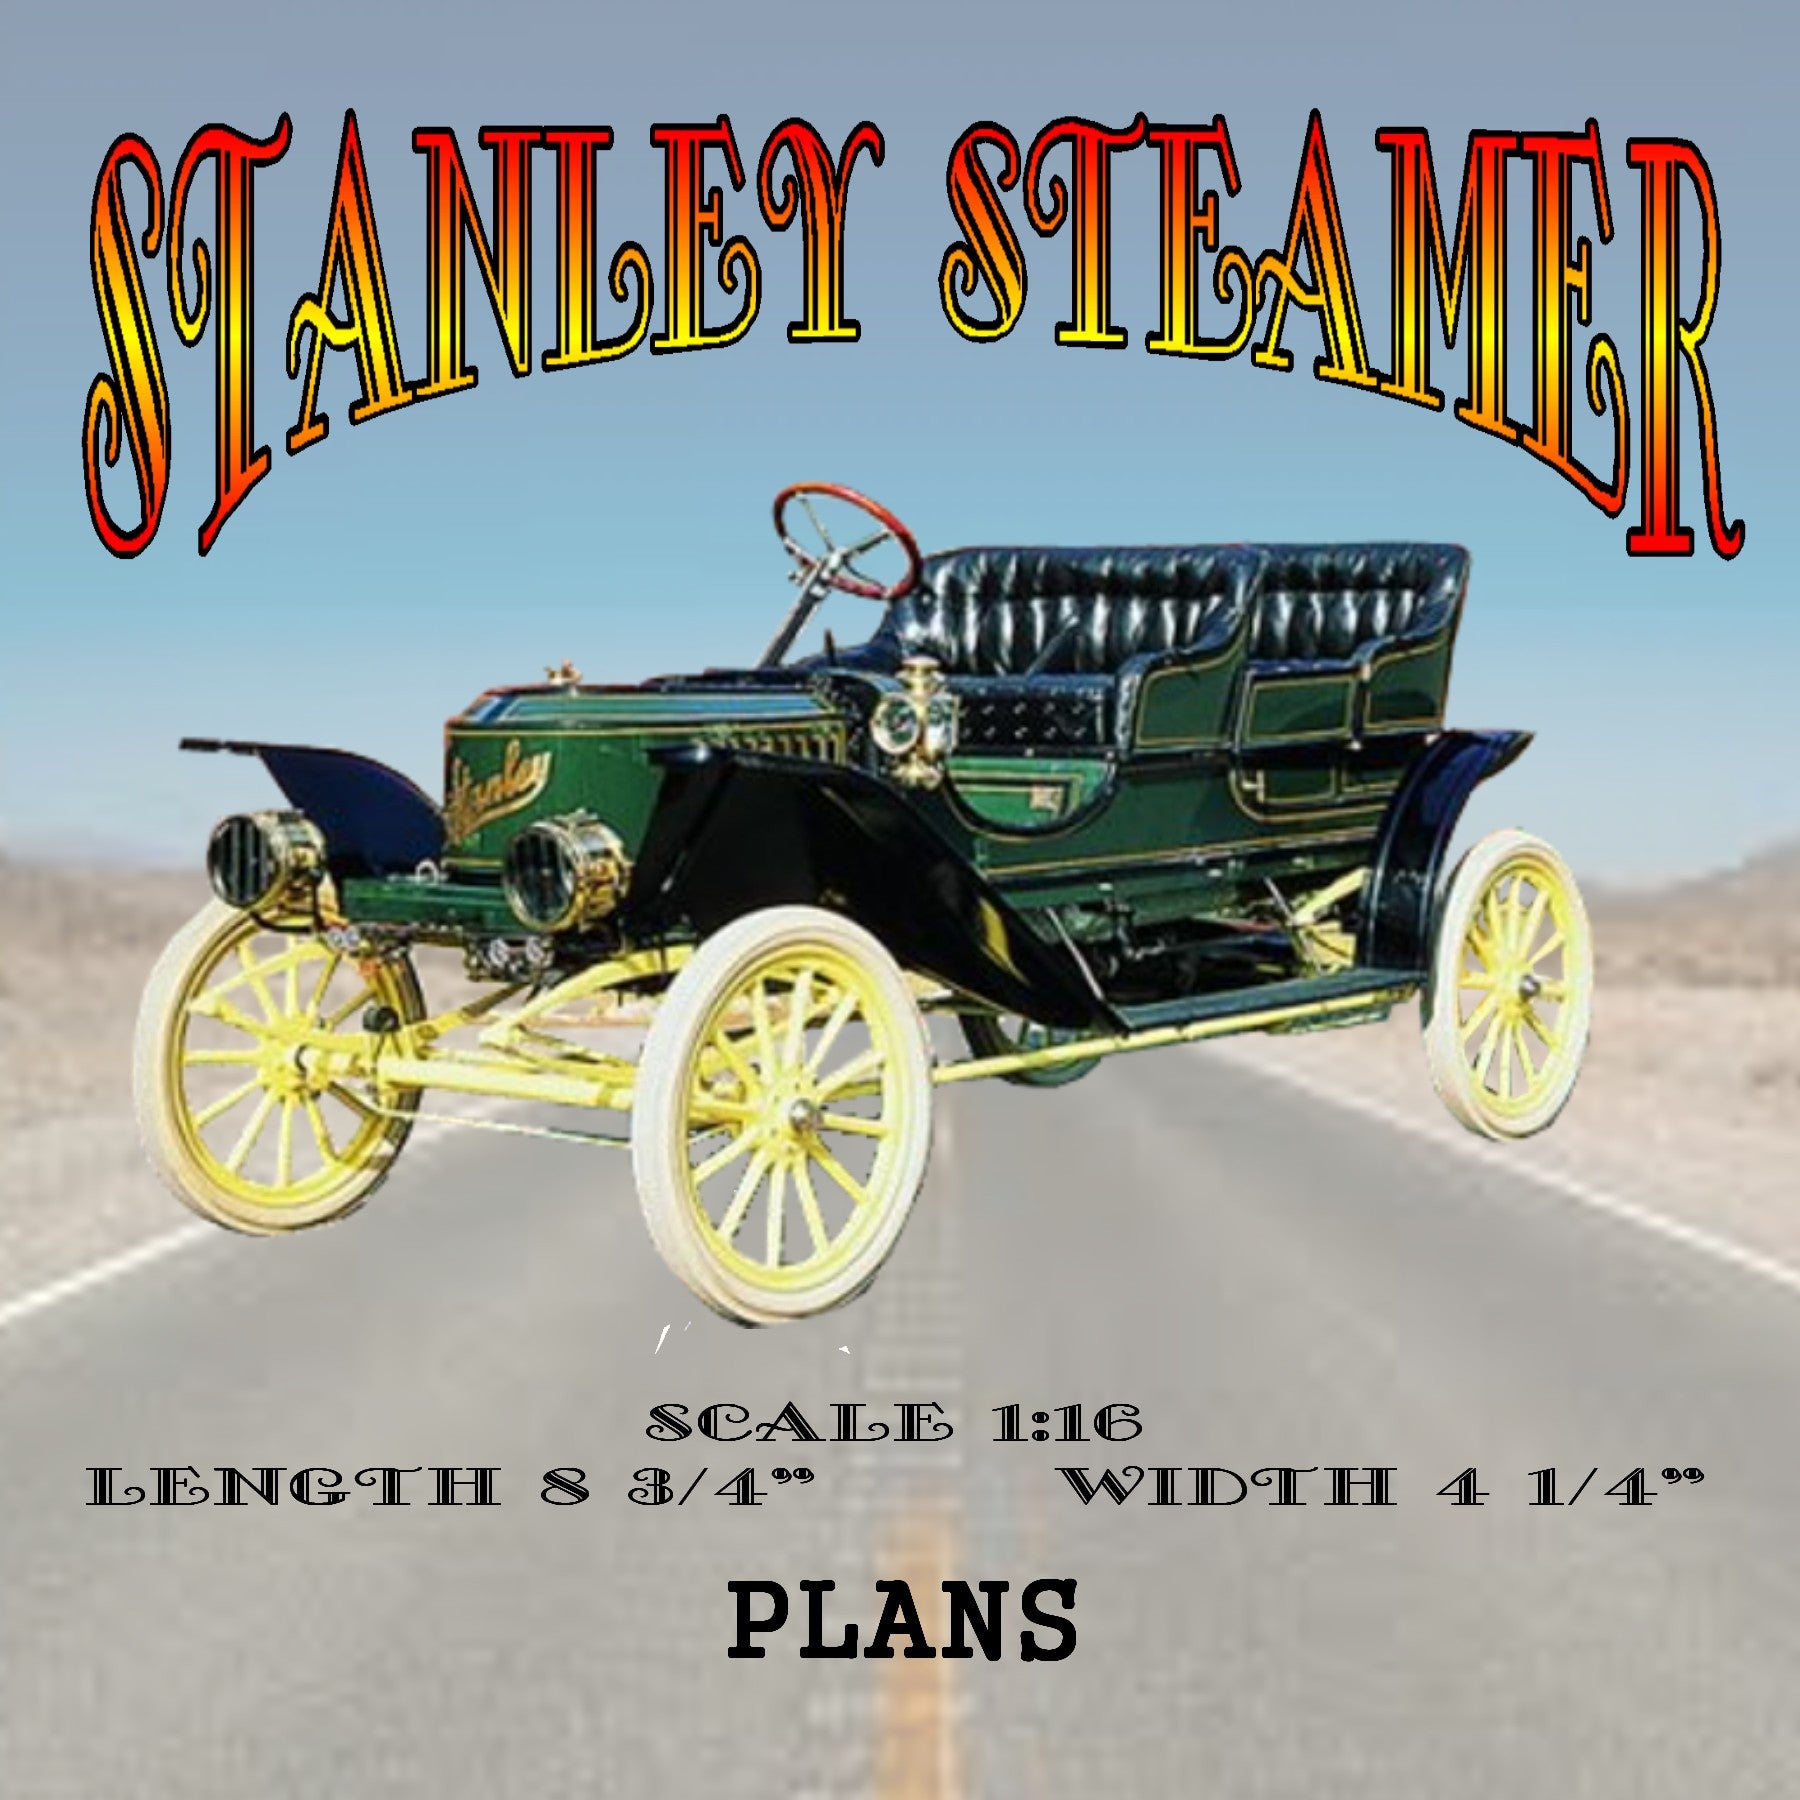 full size printed plans stanley steamer scale 1:16  l 8 ¾”  w 4 ¼”